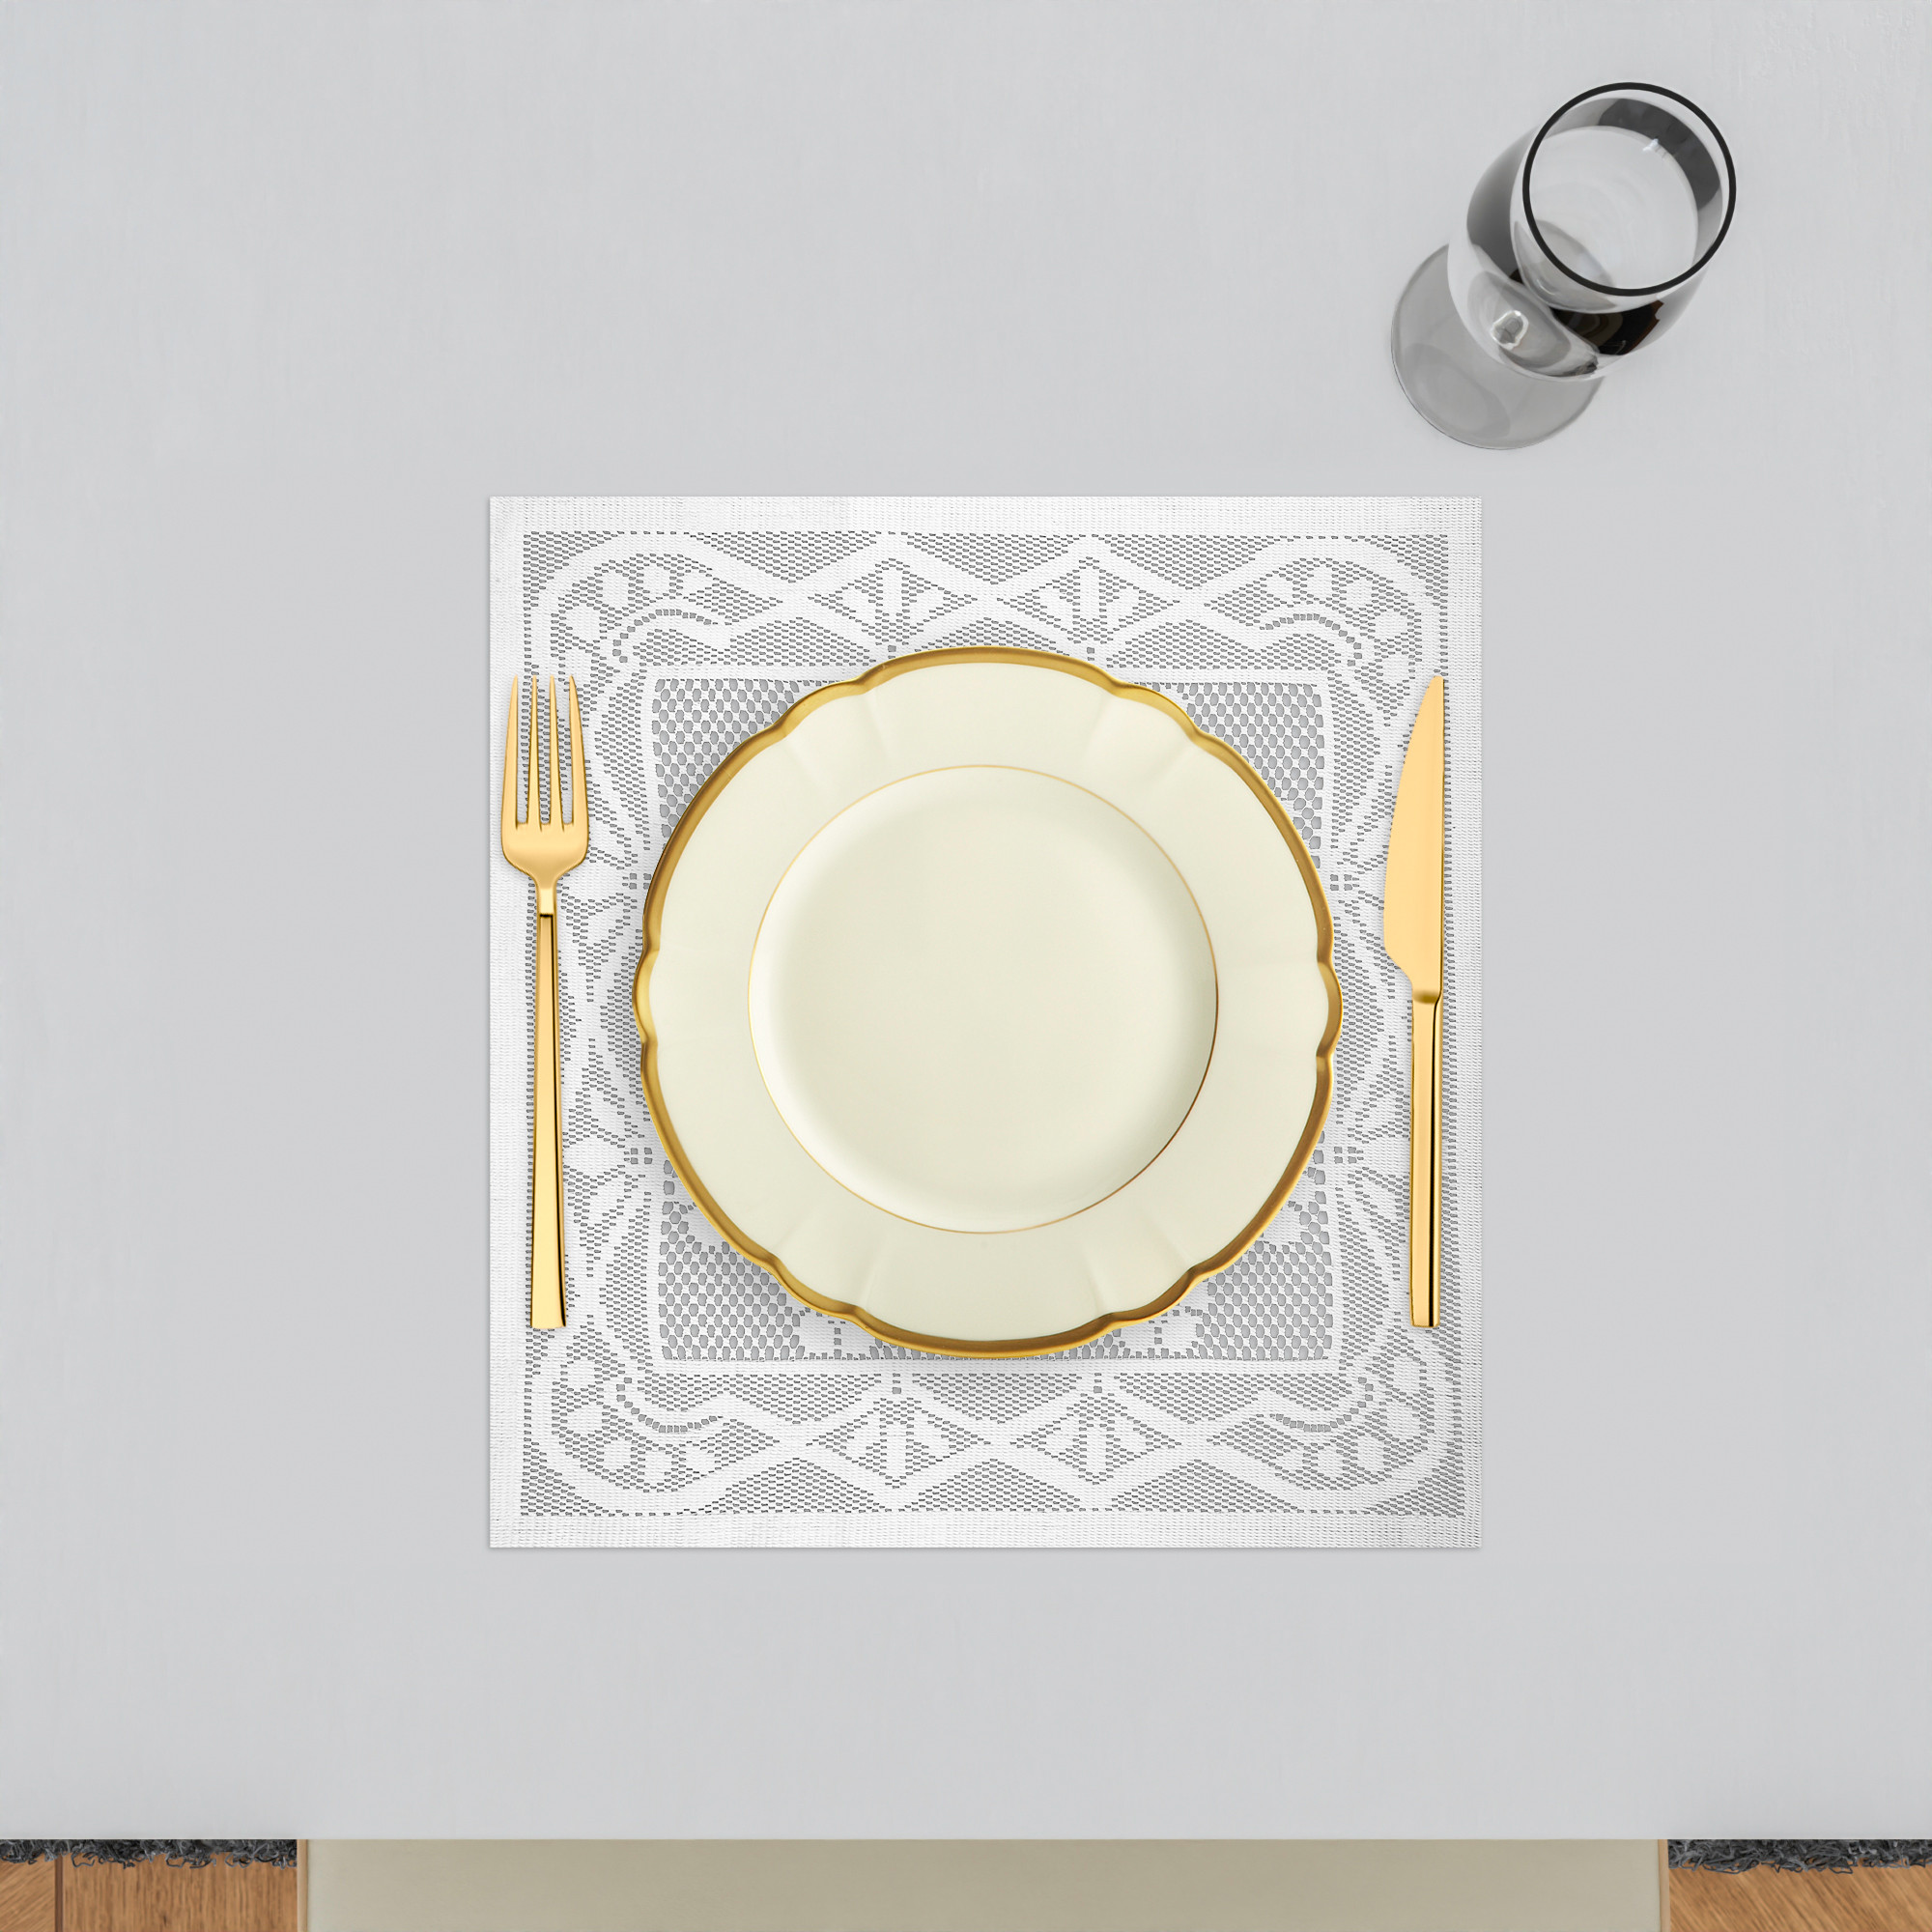 Kuber Industries Placemat | Dining Table Placemat | Center Table Mats | Square Plain Net Placemat Set | Side Table Placemats for Hotel-Home Décor | 20 Inch |White